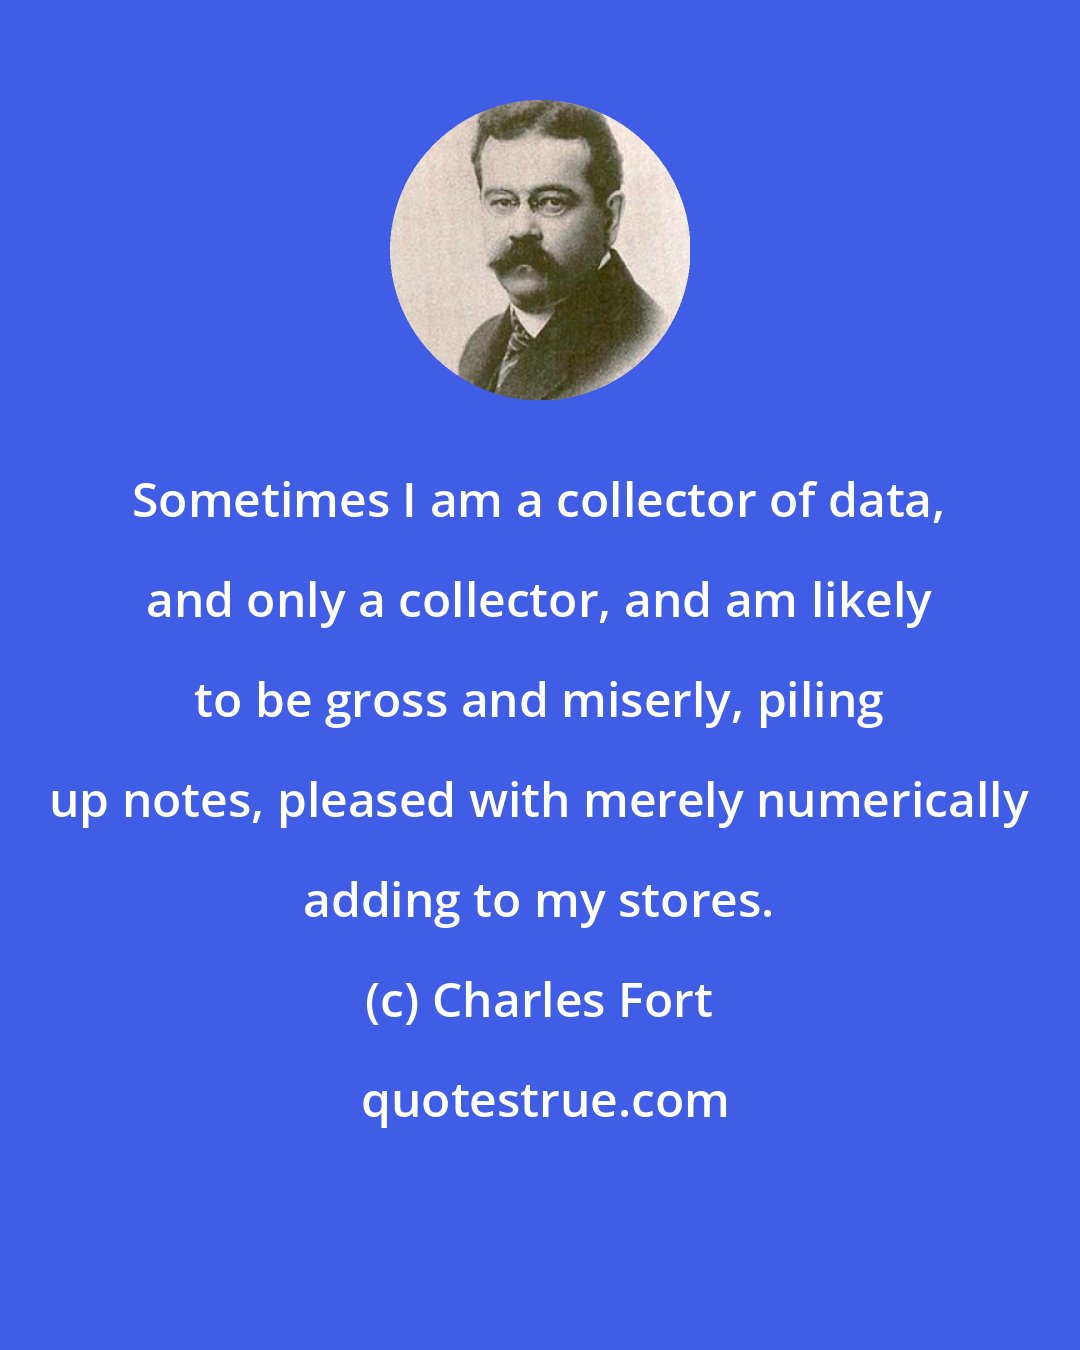 Charles Fort: Sometimes I am a collector of data, and only a collector, and am likely to be gross and miserly, piling up notes, pleased with merely numerically adding to my stores.